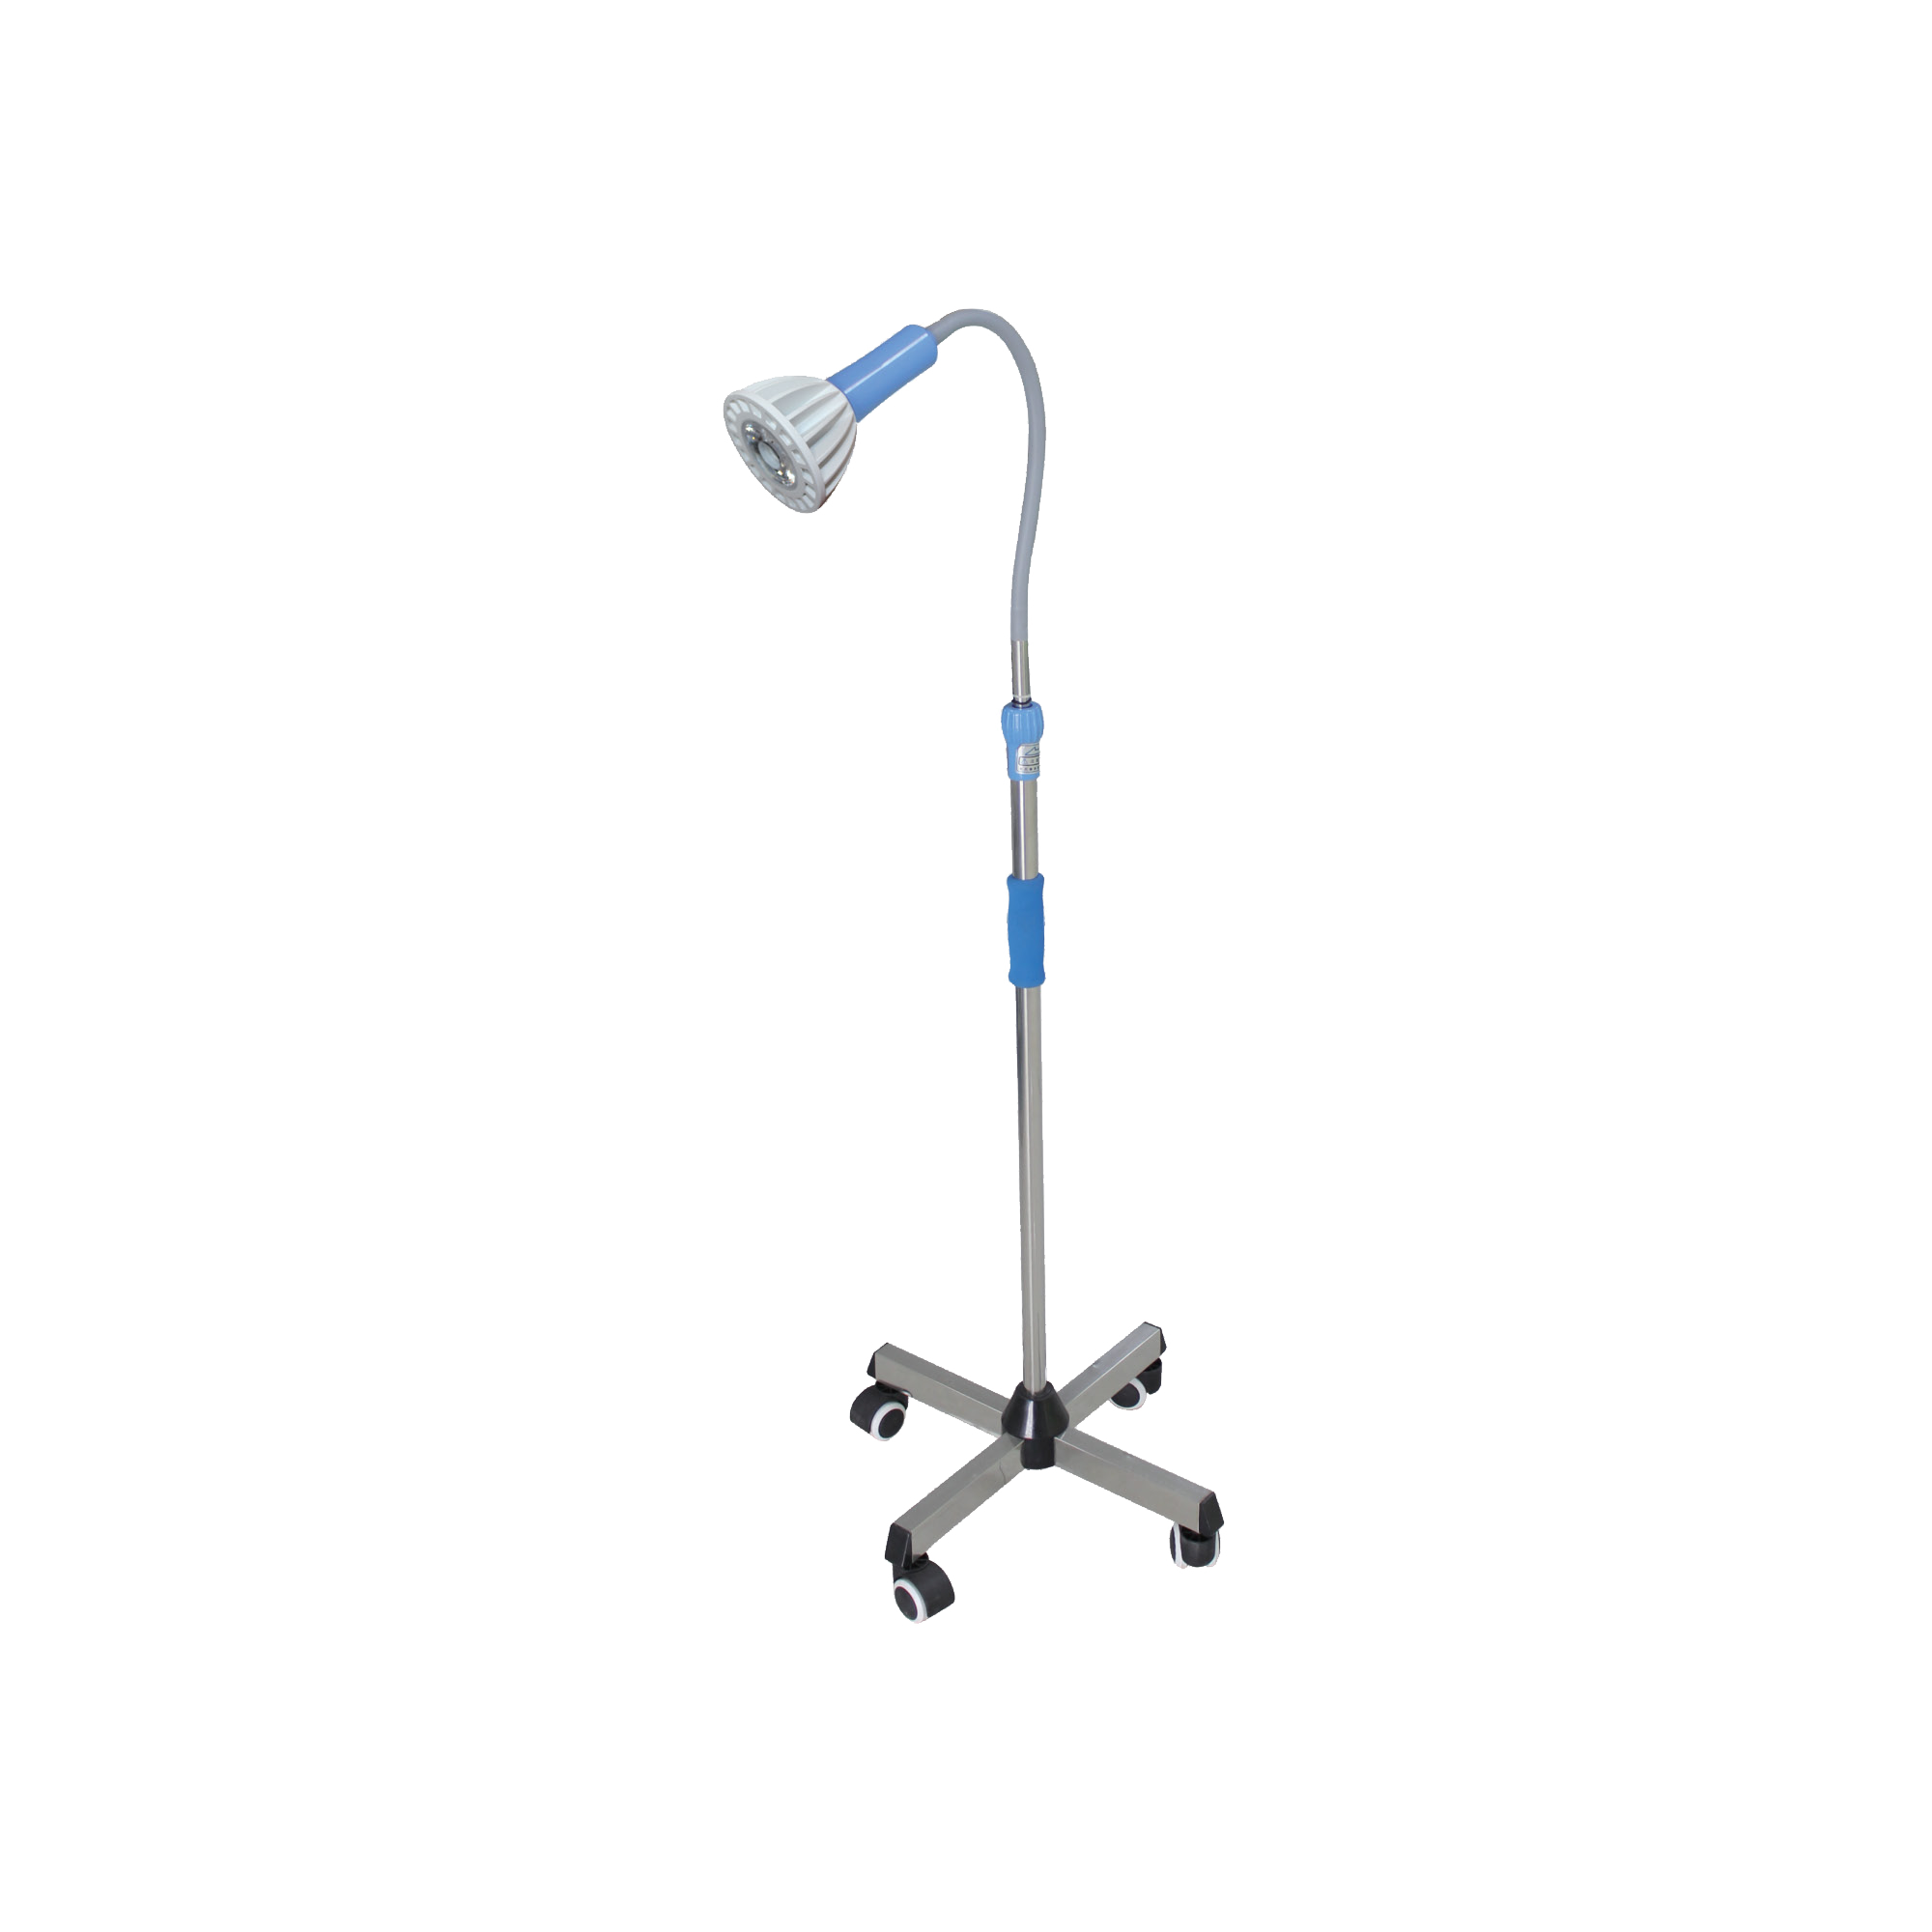 flower medical factory price examination lamps surgical light led lamp medical lamp for hospital